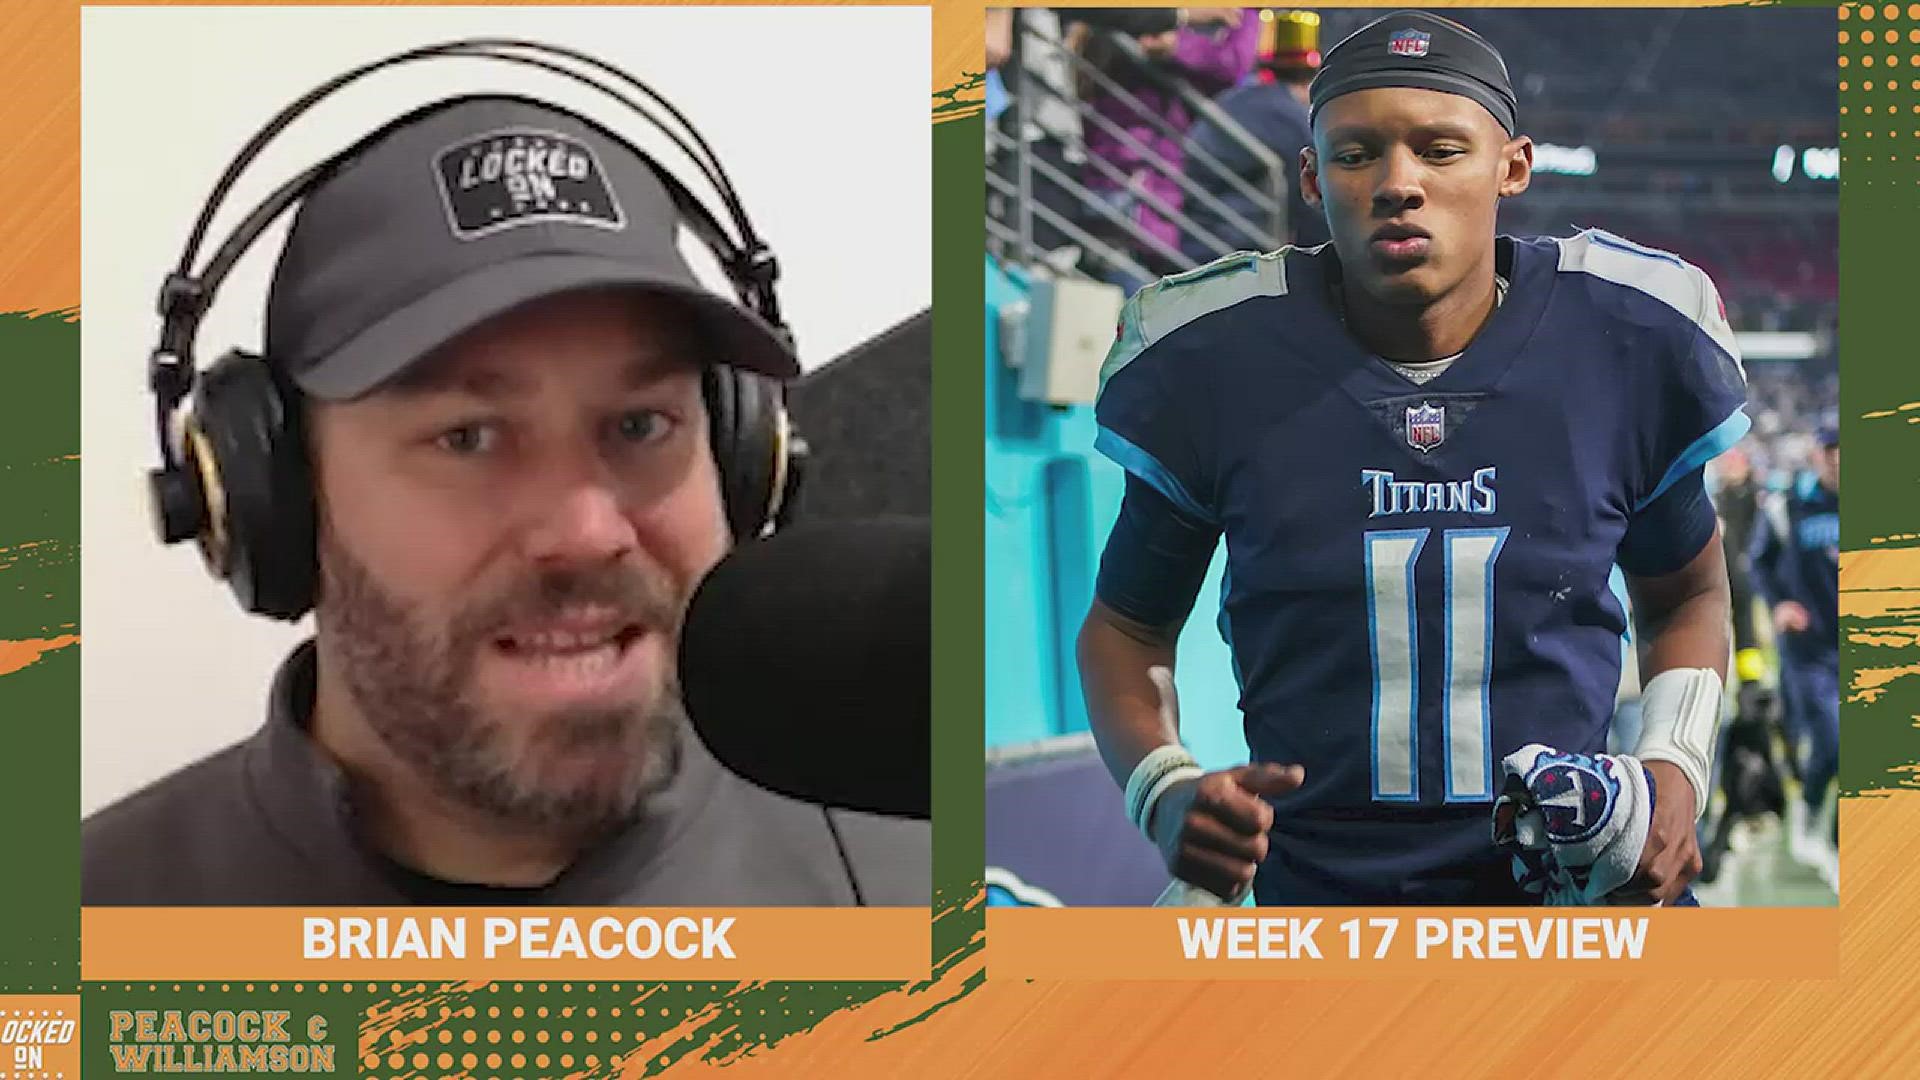 Brian Peacock & Matt Williamson discuss today's top stories in the NFL, including TNF recap and picks for week 17.